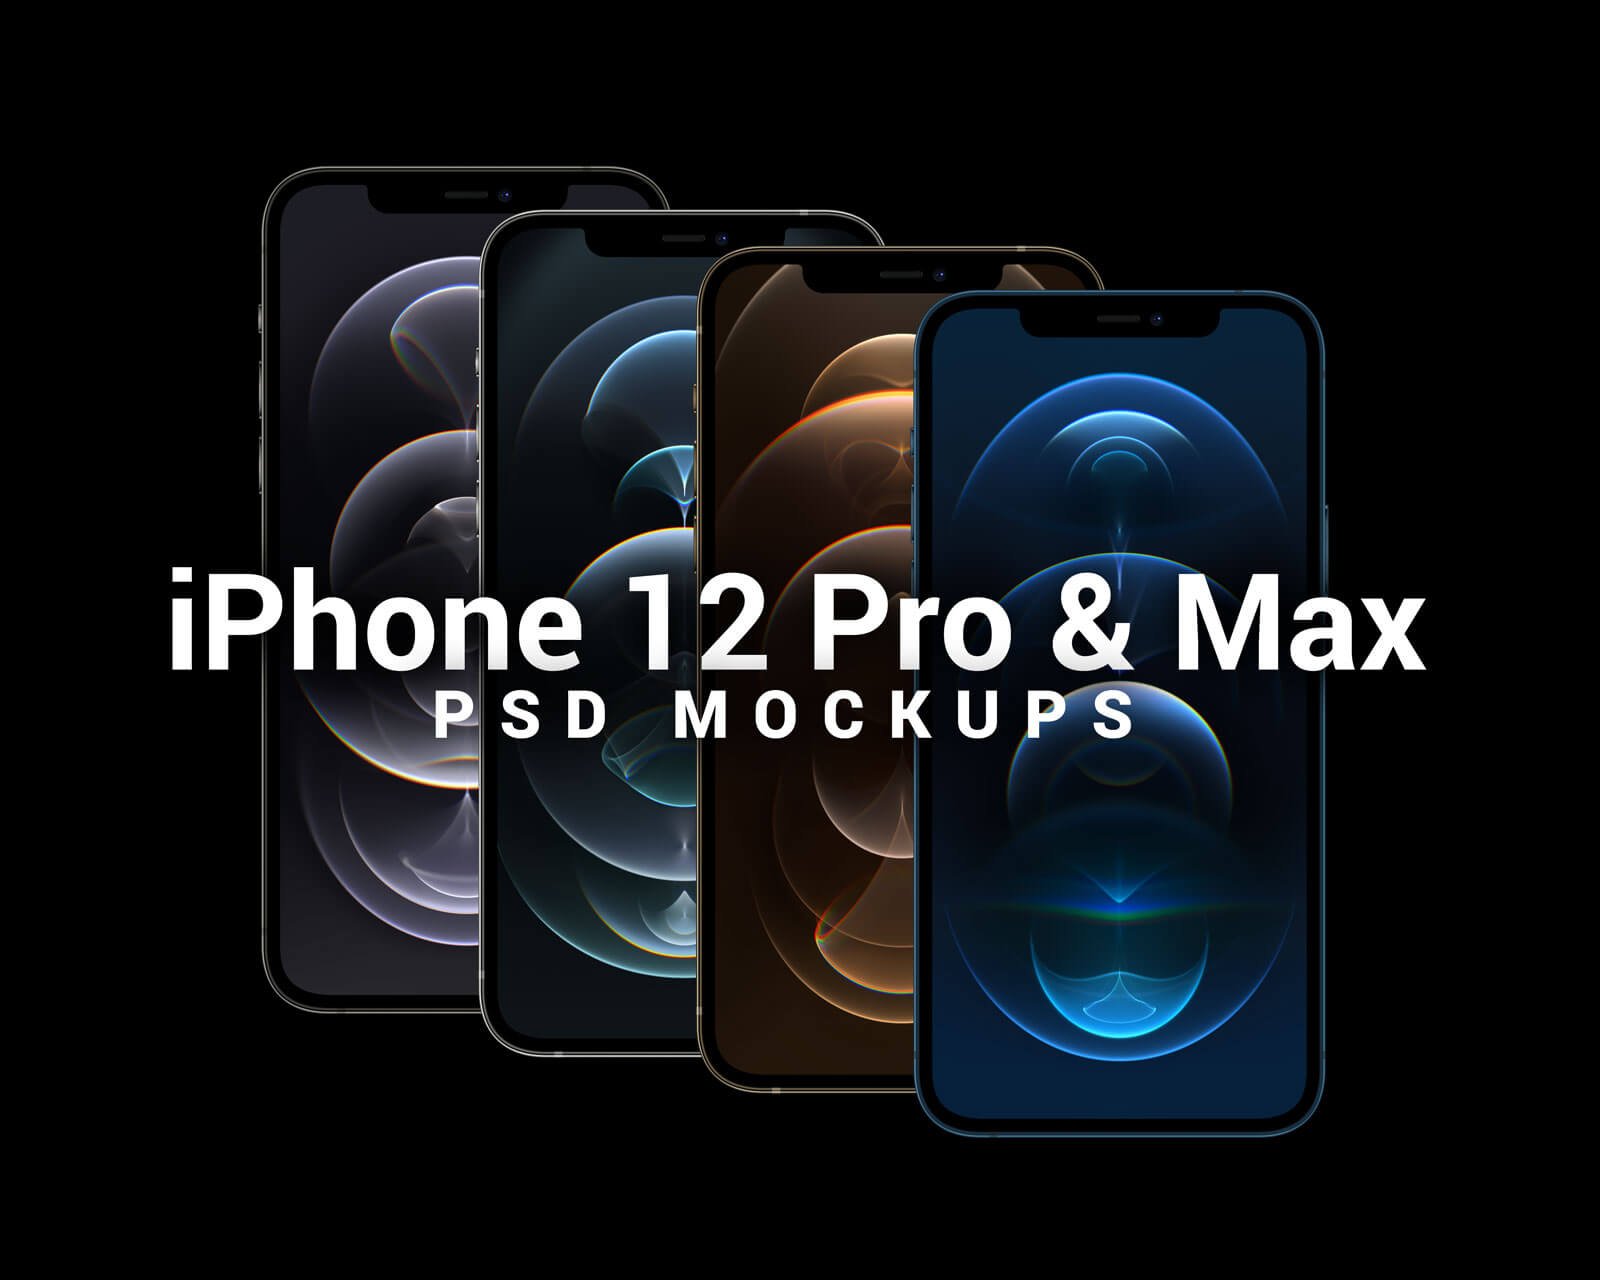 iPhone-12-Pro-Max-&-iPhone-12-Pro-Mockup-PSD-(All-Colors)